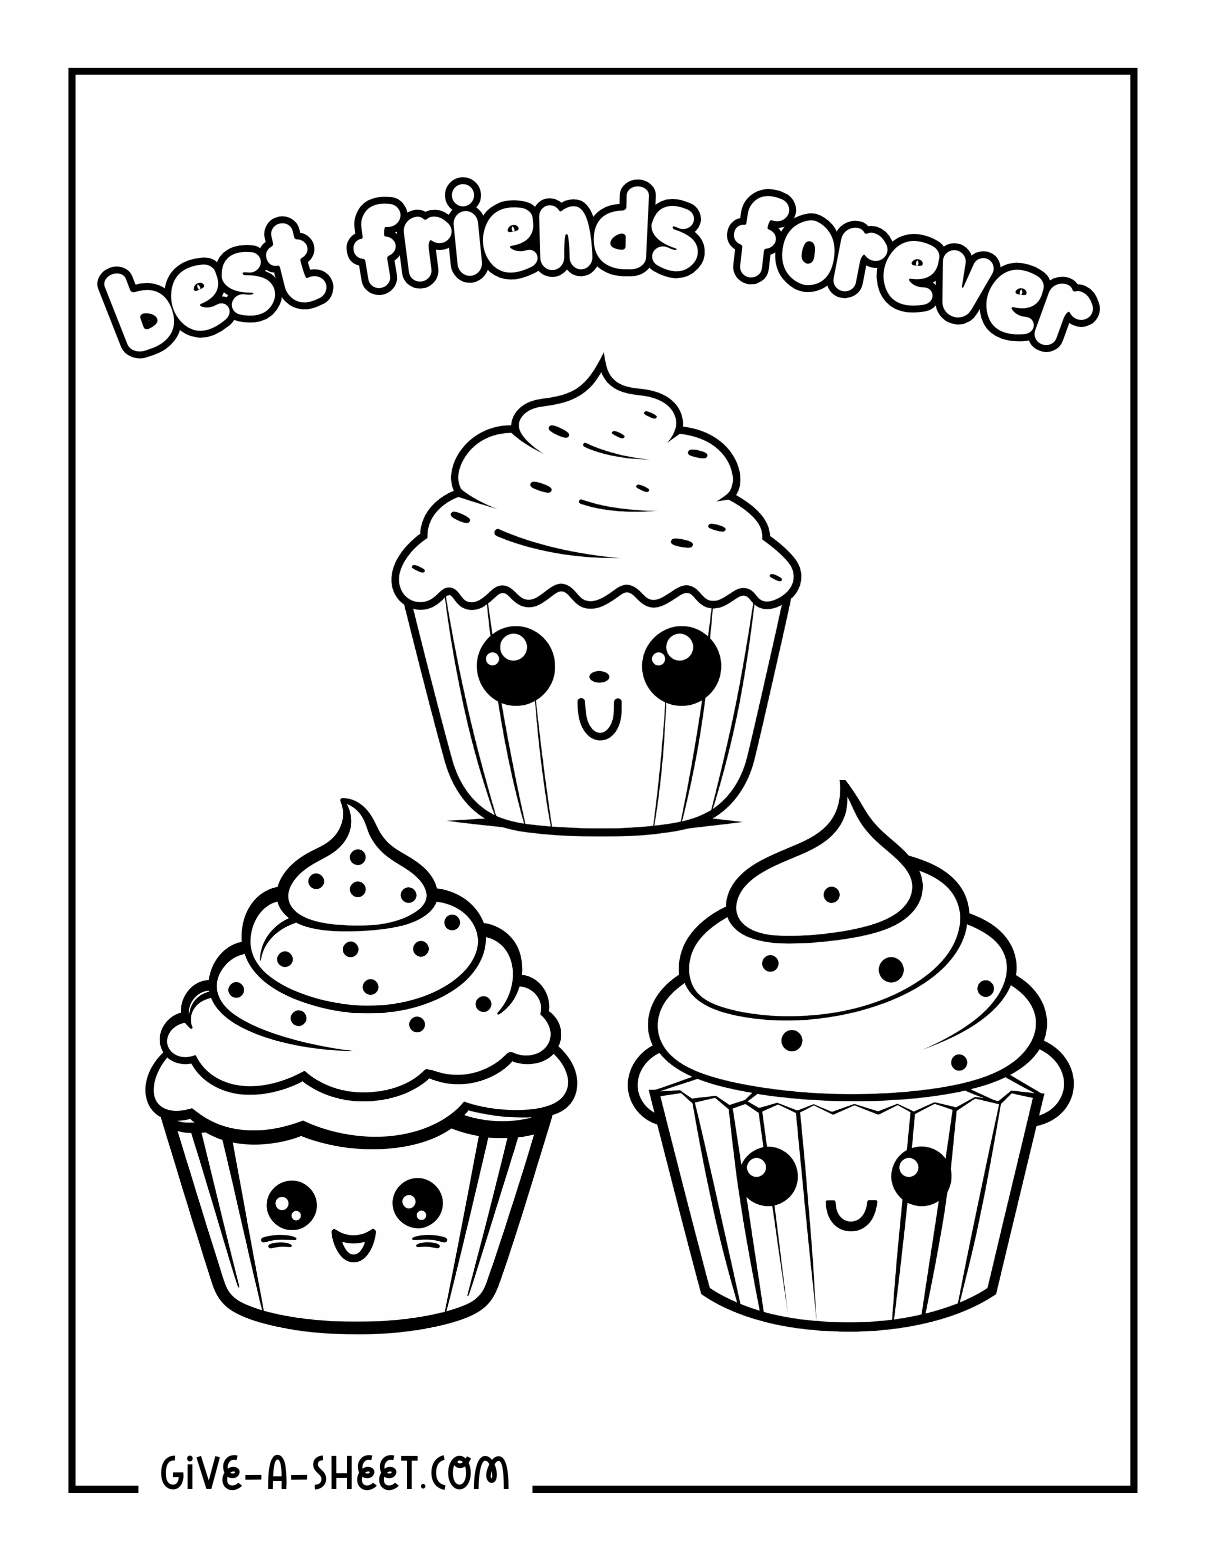 Printable three best friends coloring sheet cupcakes.